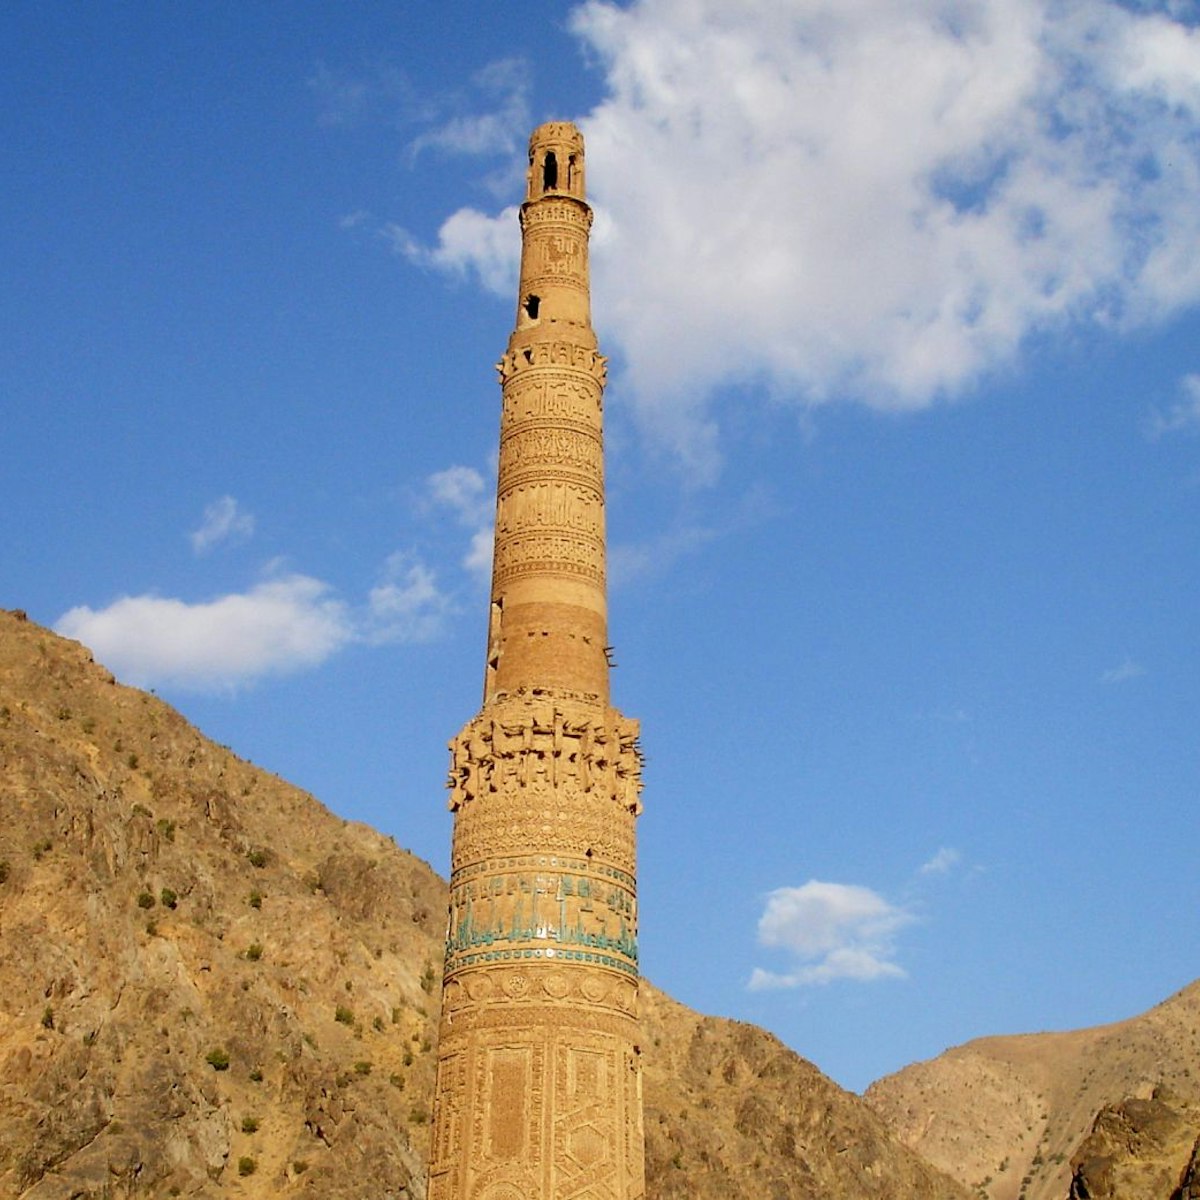 Minaret of Jam - stock photo

Afghanistan

Reaching a dizzying height of 65m, the Minaret of Jam stands as a lonely sentinel at the confluence of the Hari Rud and Jam Rud rivers, the greatest surviving monument of the medieval Ghorid empire. 